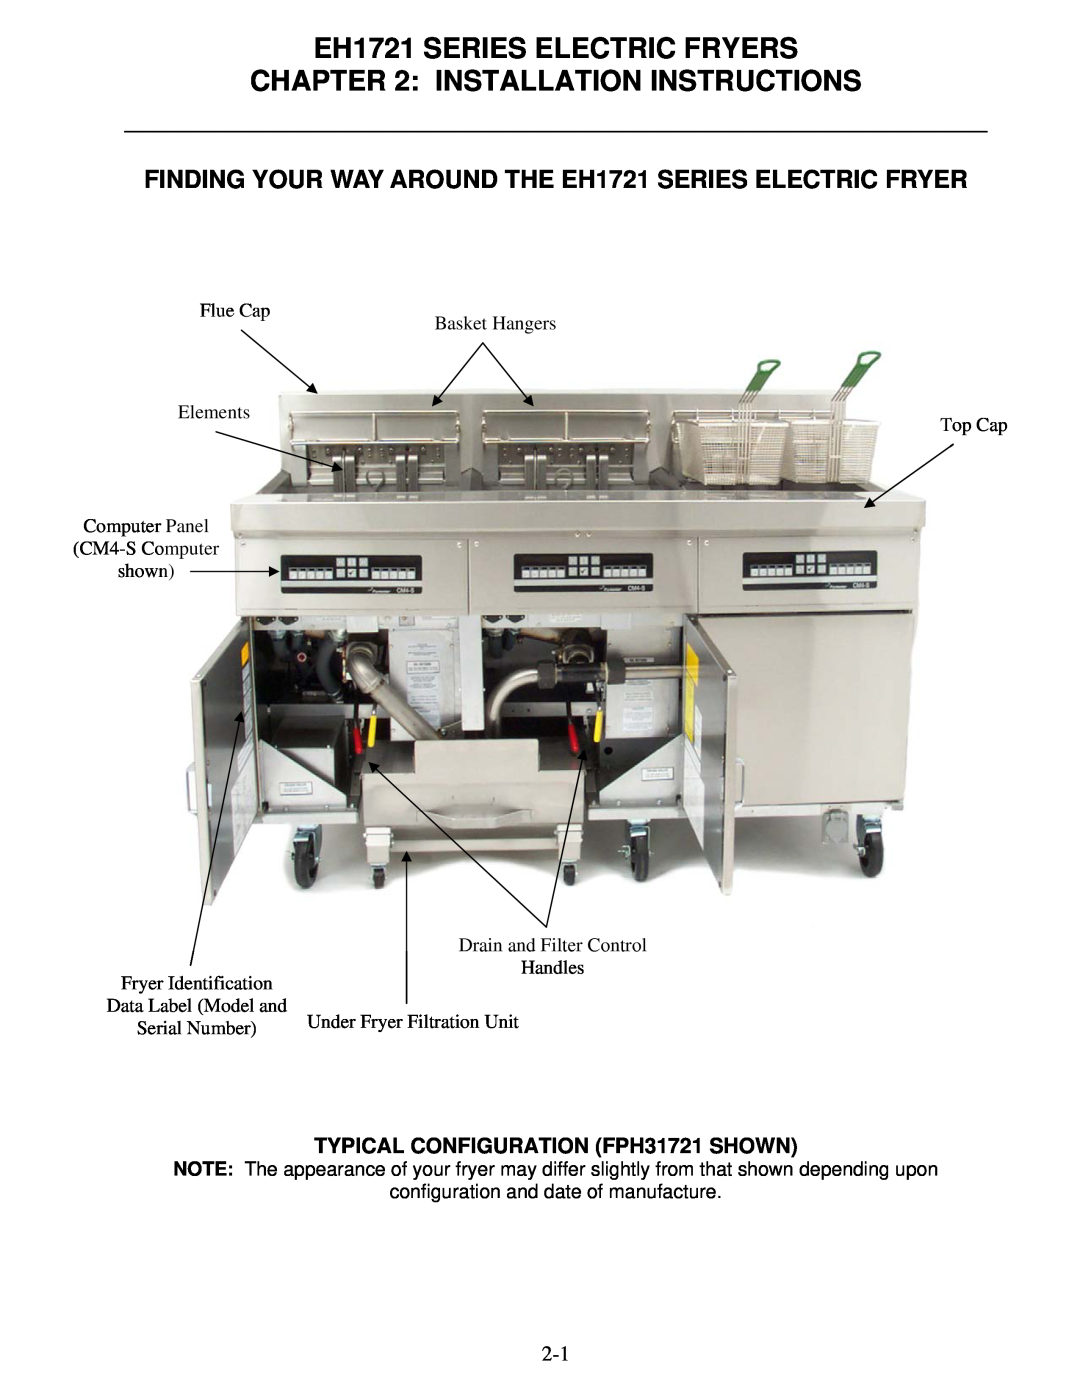 Frymaster FPH1721, BIH1721 EH1721 SERIES ELECTRIC FRYERS INSTALLATION INSTRUCTIONS, configuration and date of manufacture 